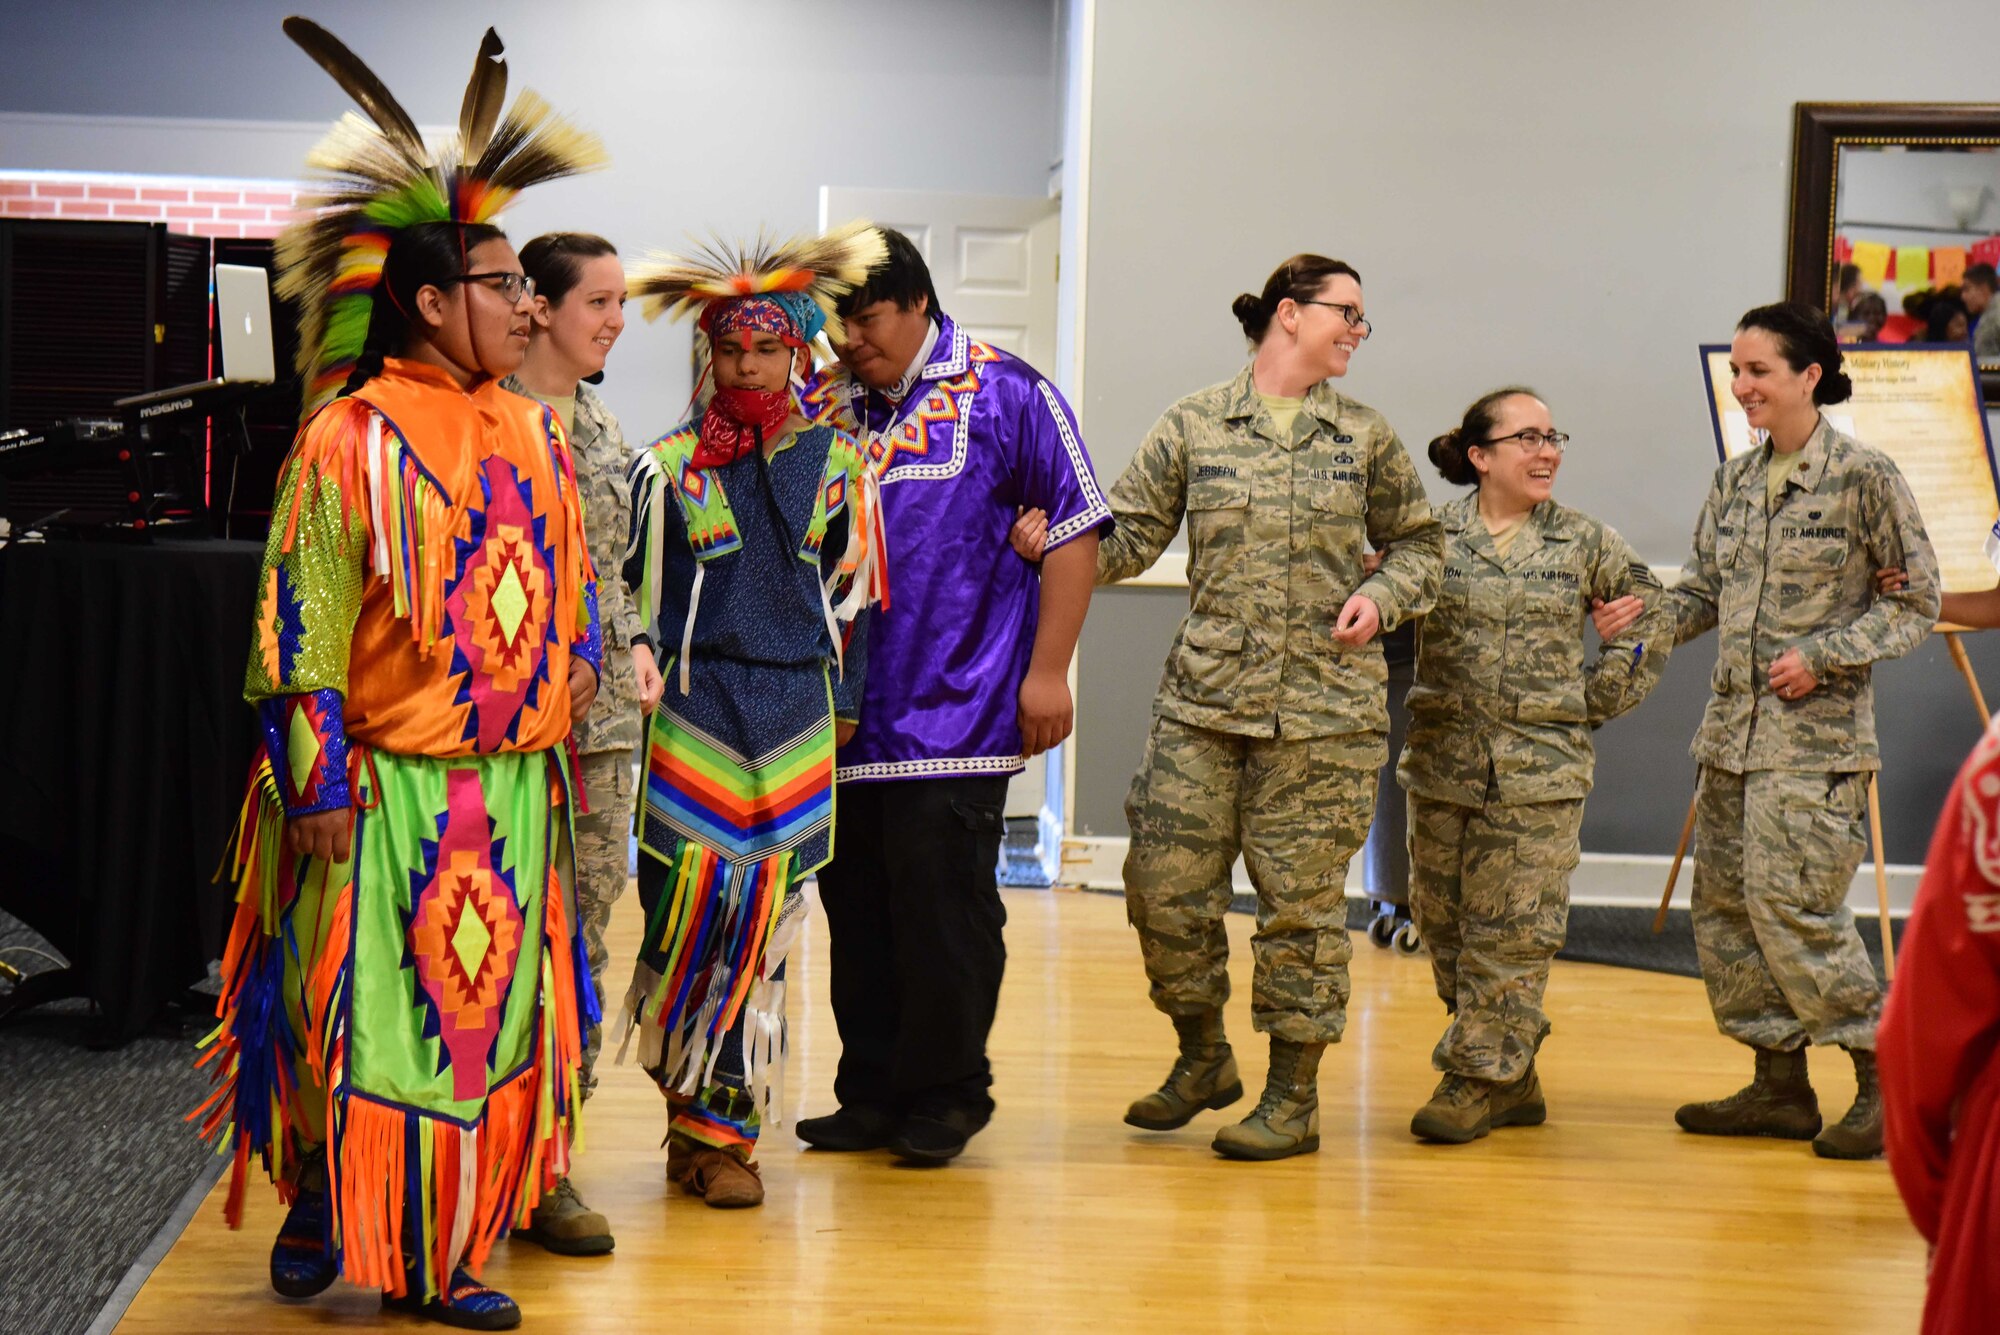 Choctaw dancers joined by military members lock arms for the festivities at Diversity Day, June 7, 2019, on Columbus Air Force Base, Miss. The Choctaw Dancers asked the attendees to get involved in a few of their traditional dances to get the community involved in their traditions. (U.S. Air Force photo by Elizabeth Owens)